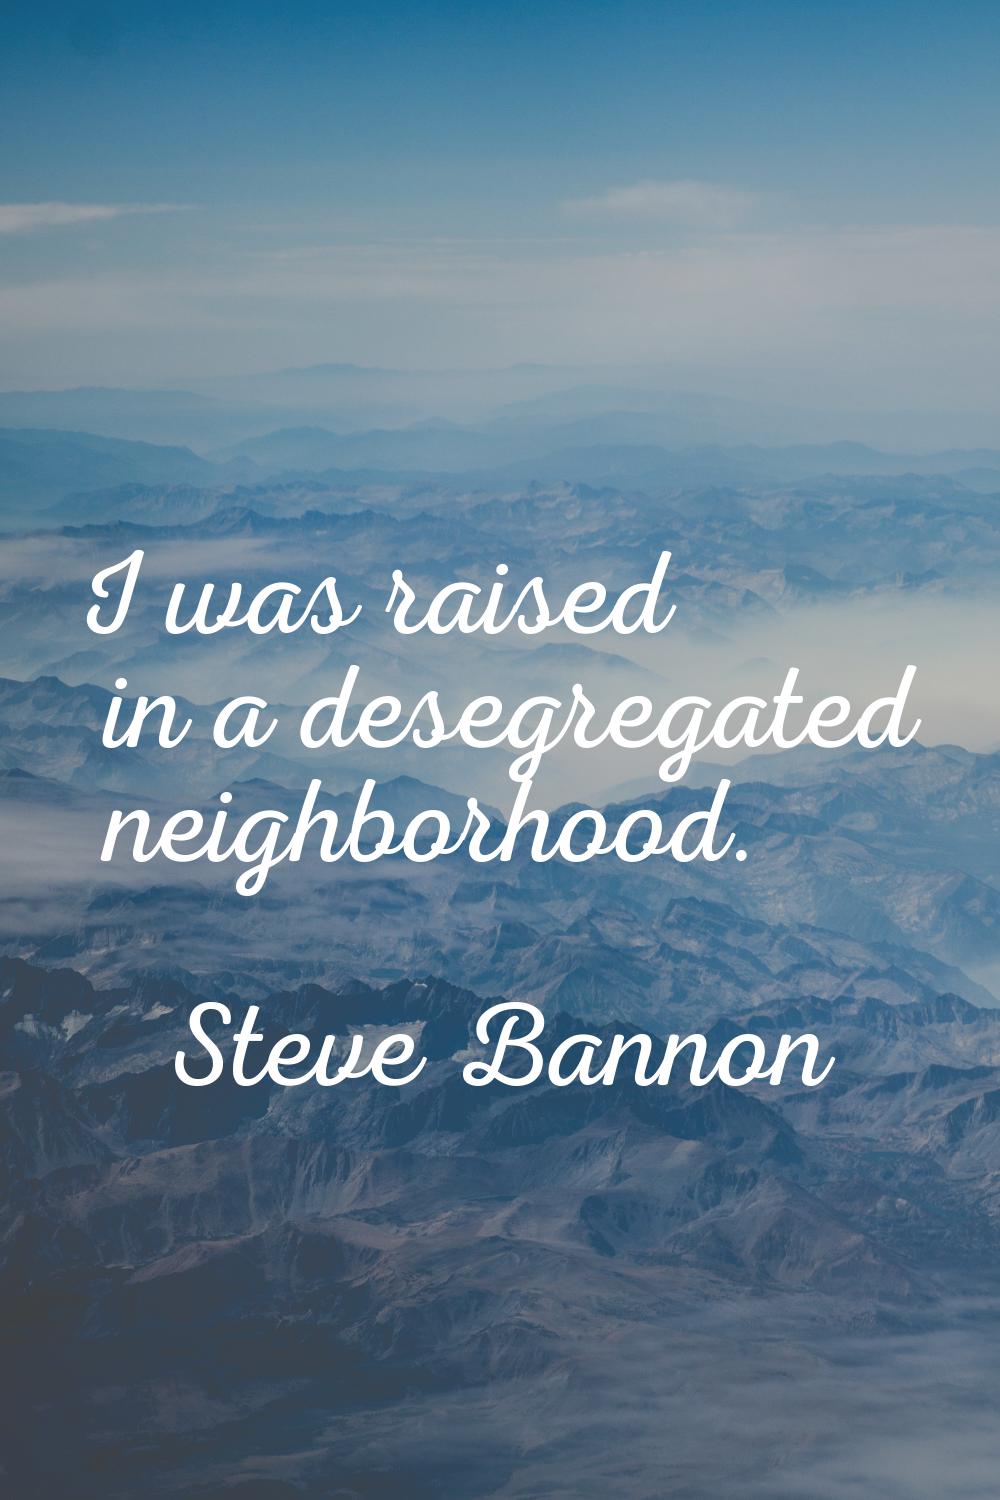 I was raised in a desegregated neighborhood.